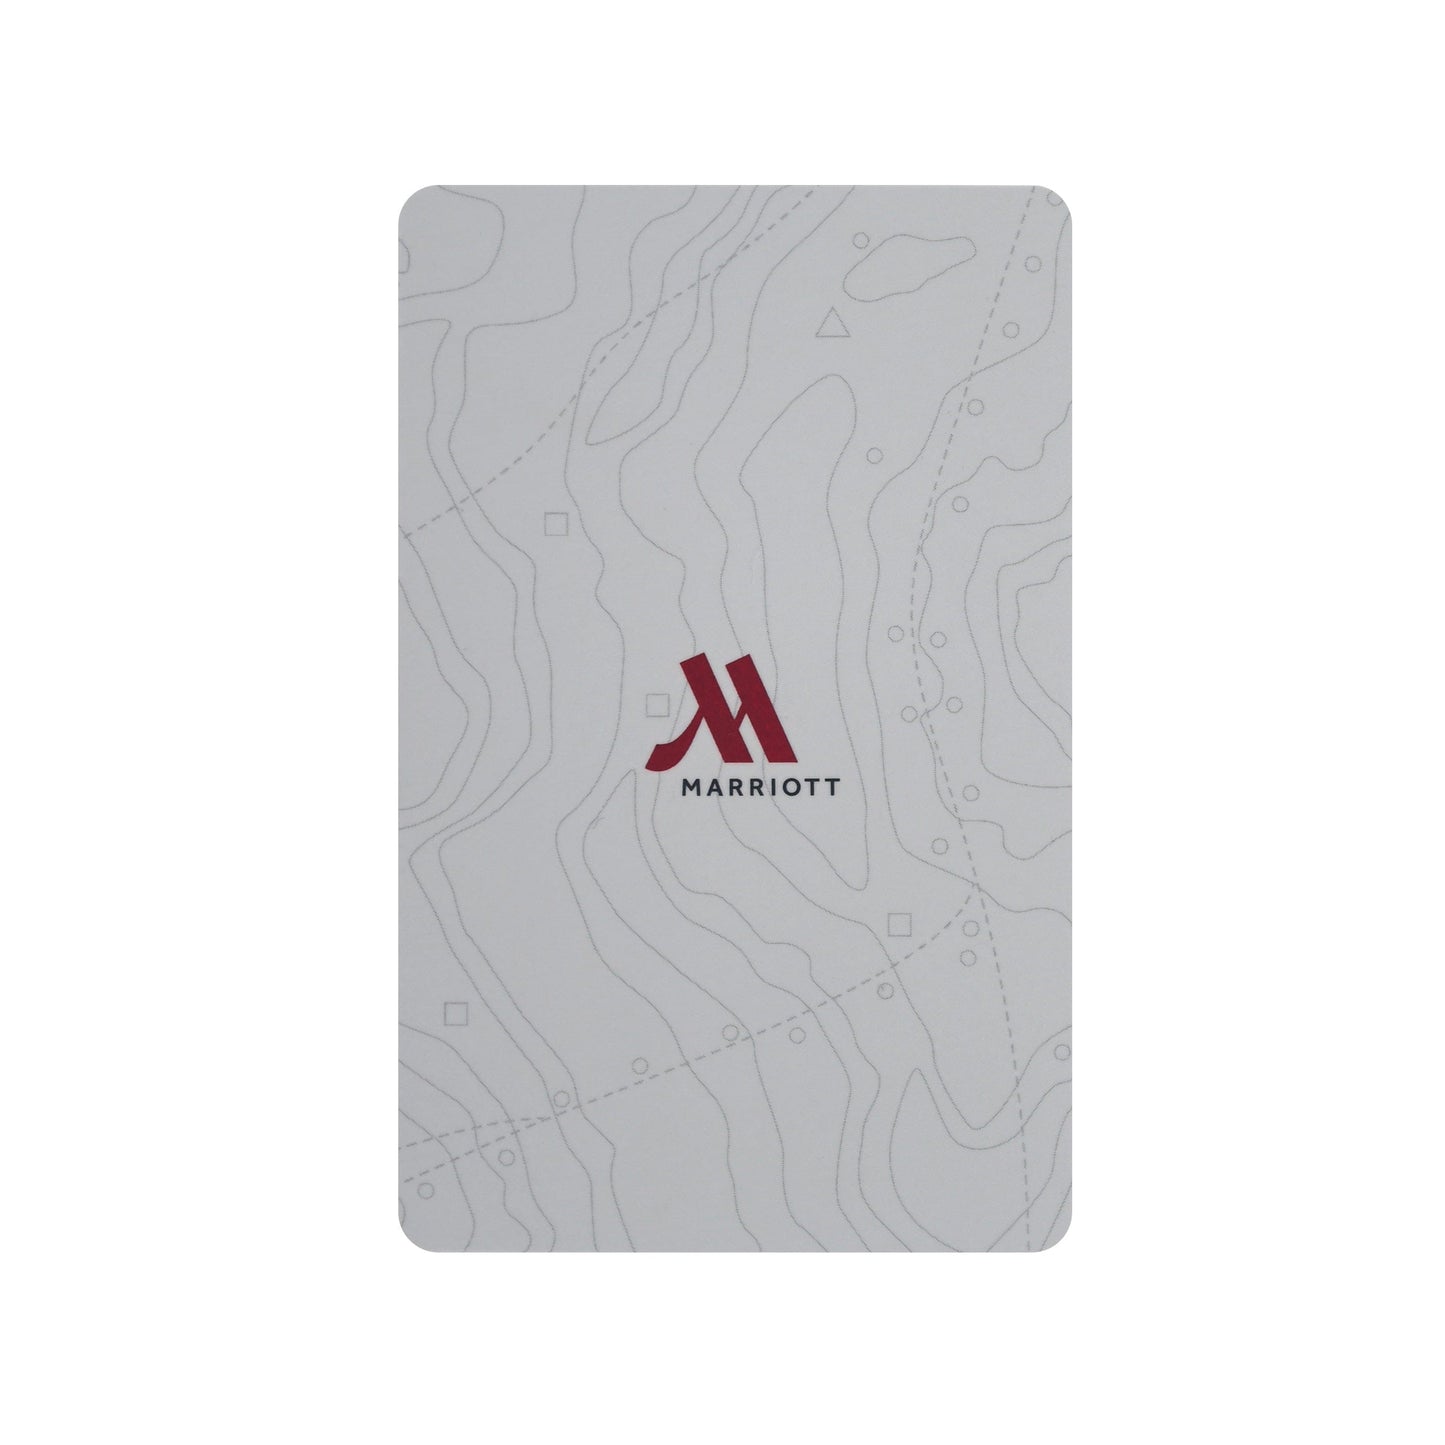 Marriott Full Service RFID Key Cards (Sold in boxes of 200)